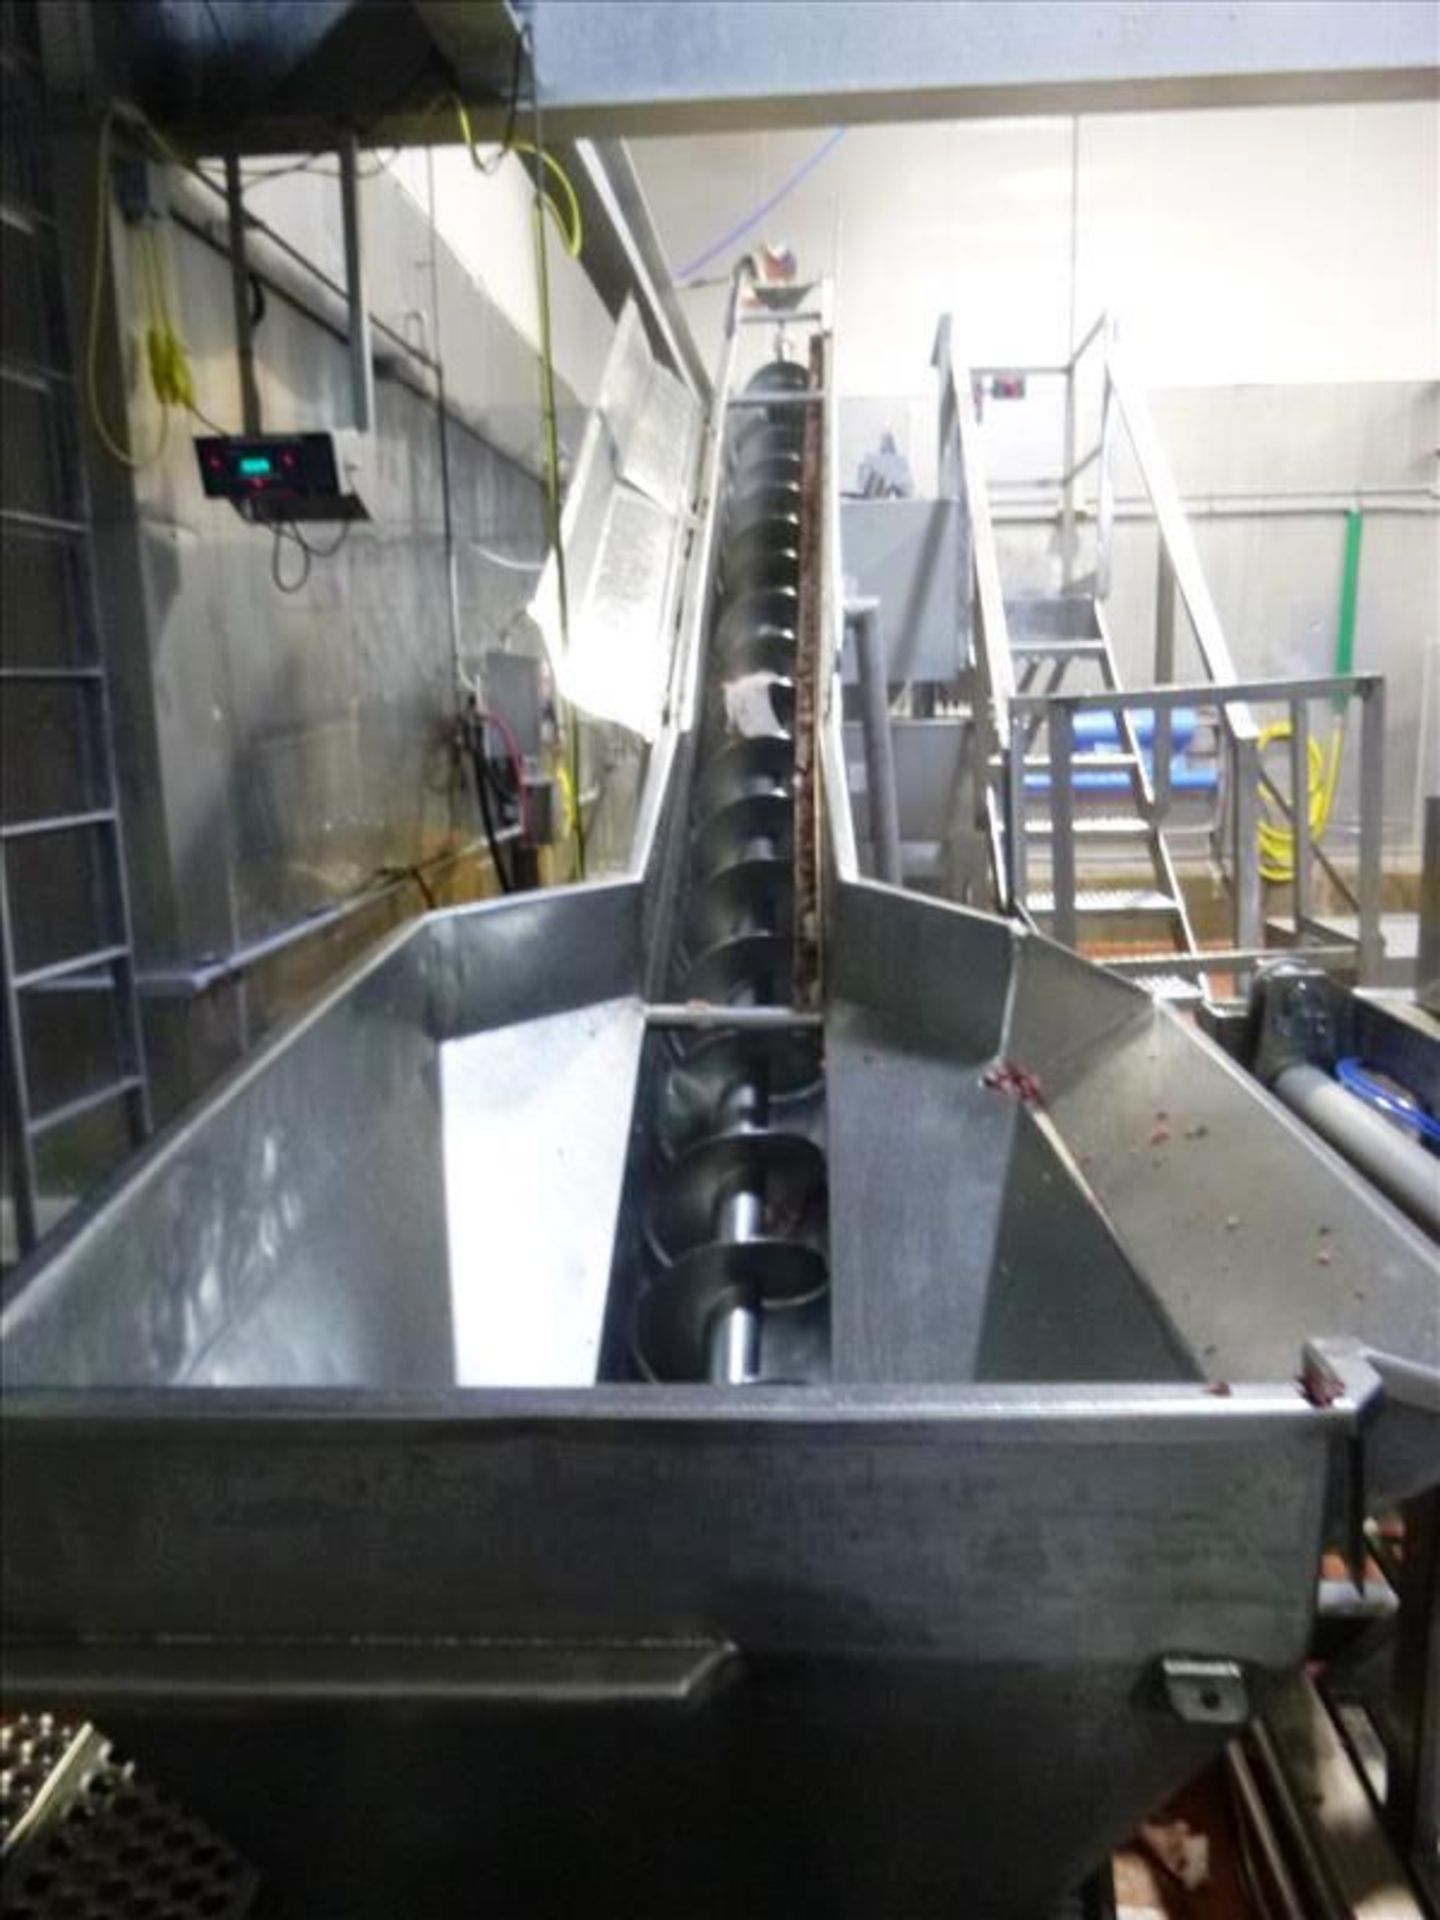 s/s screw conveyor w/ sides cells c/w Weigh-Tronix mod. WI-110 weigh indicator 18L c/w hopper and